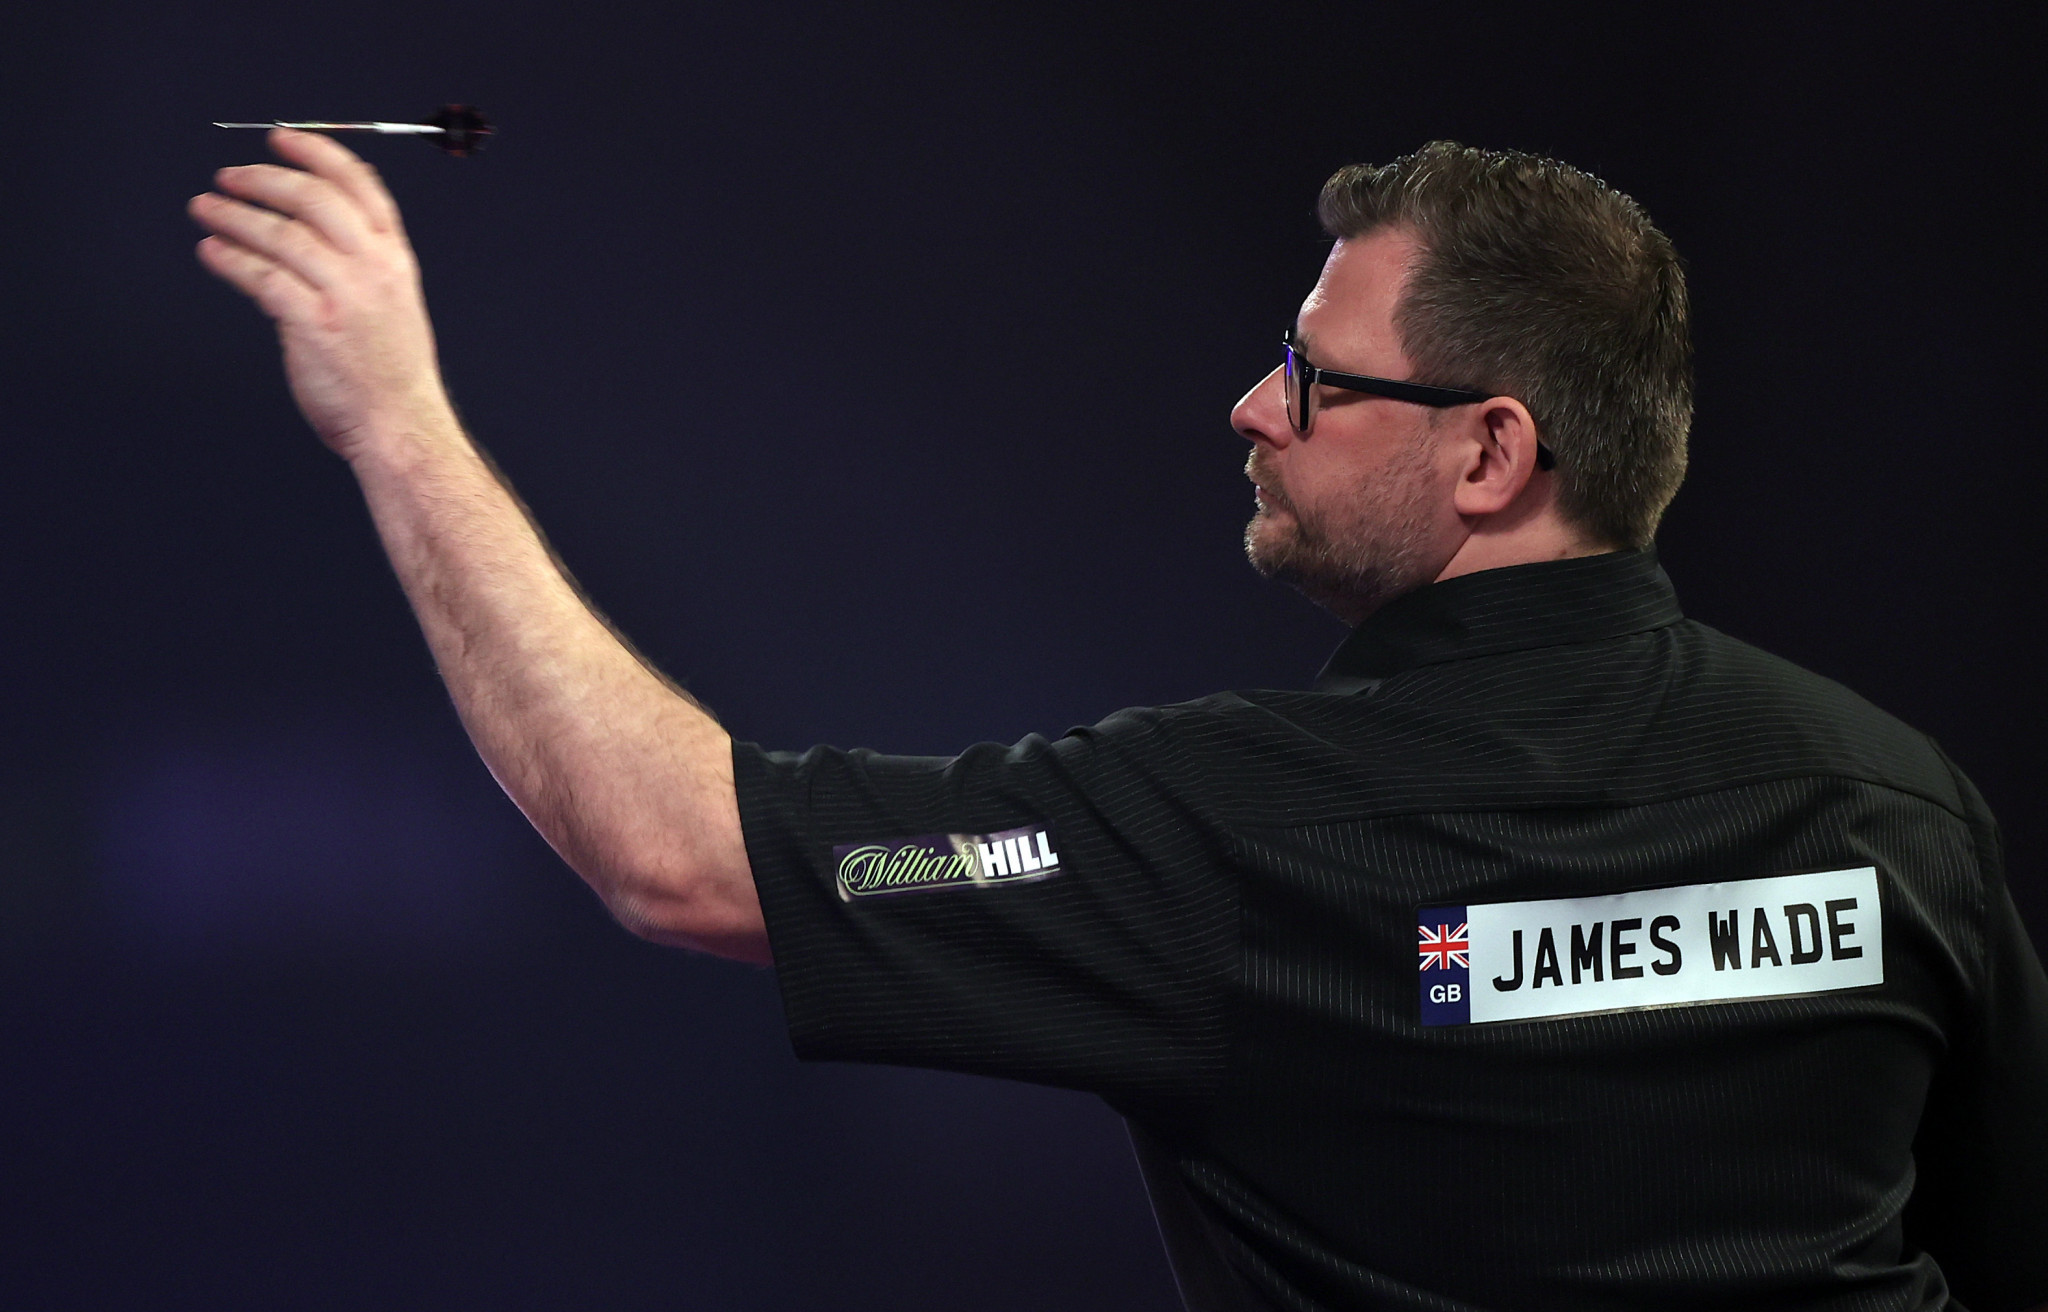 England's James Wade hit a nine-darter but was still defeated by Stephen Bunting during the third round of the PDC World Darts Championship ©Getty Images